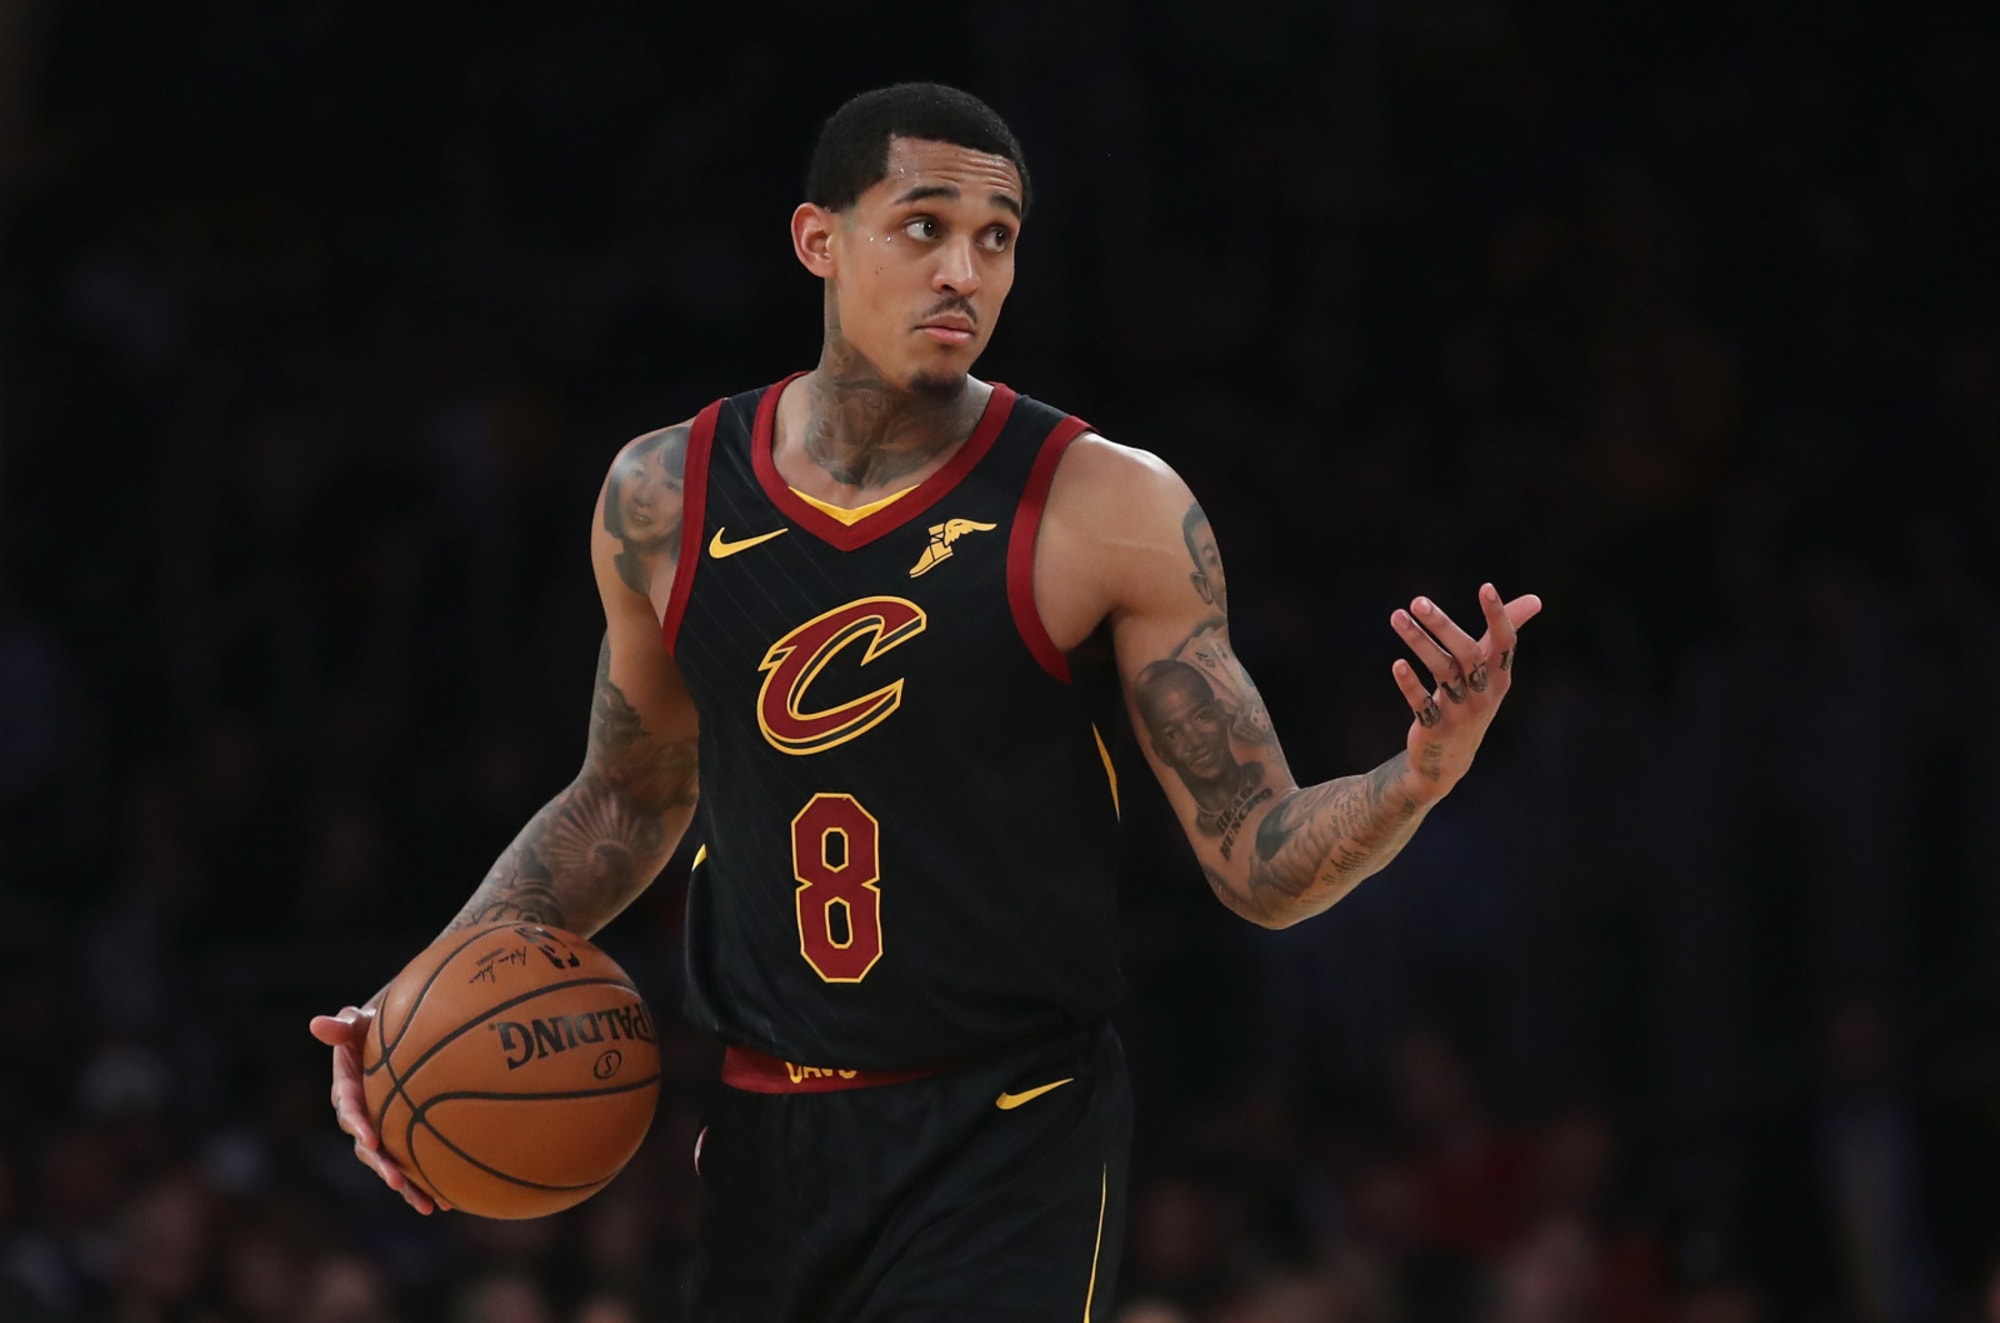 Cleveland Cavaliers: Jordan Clarkson may fetch 1st-round pick in